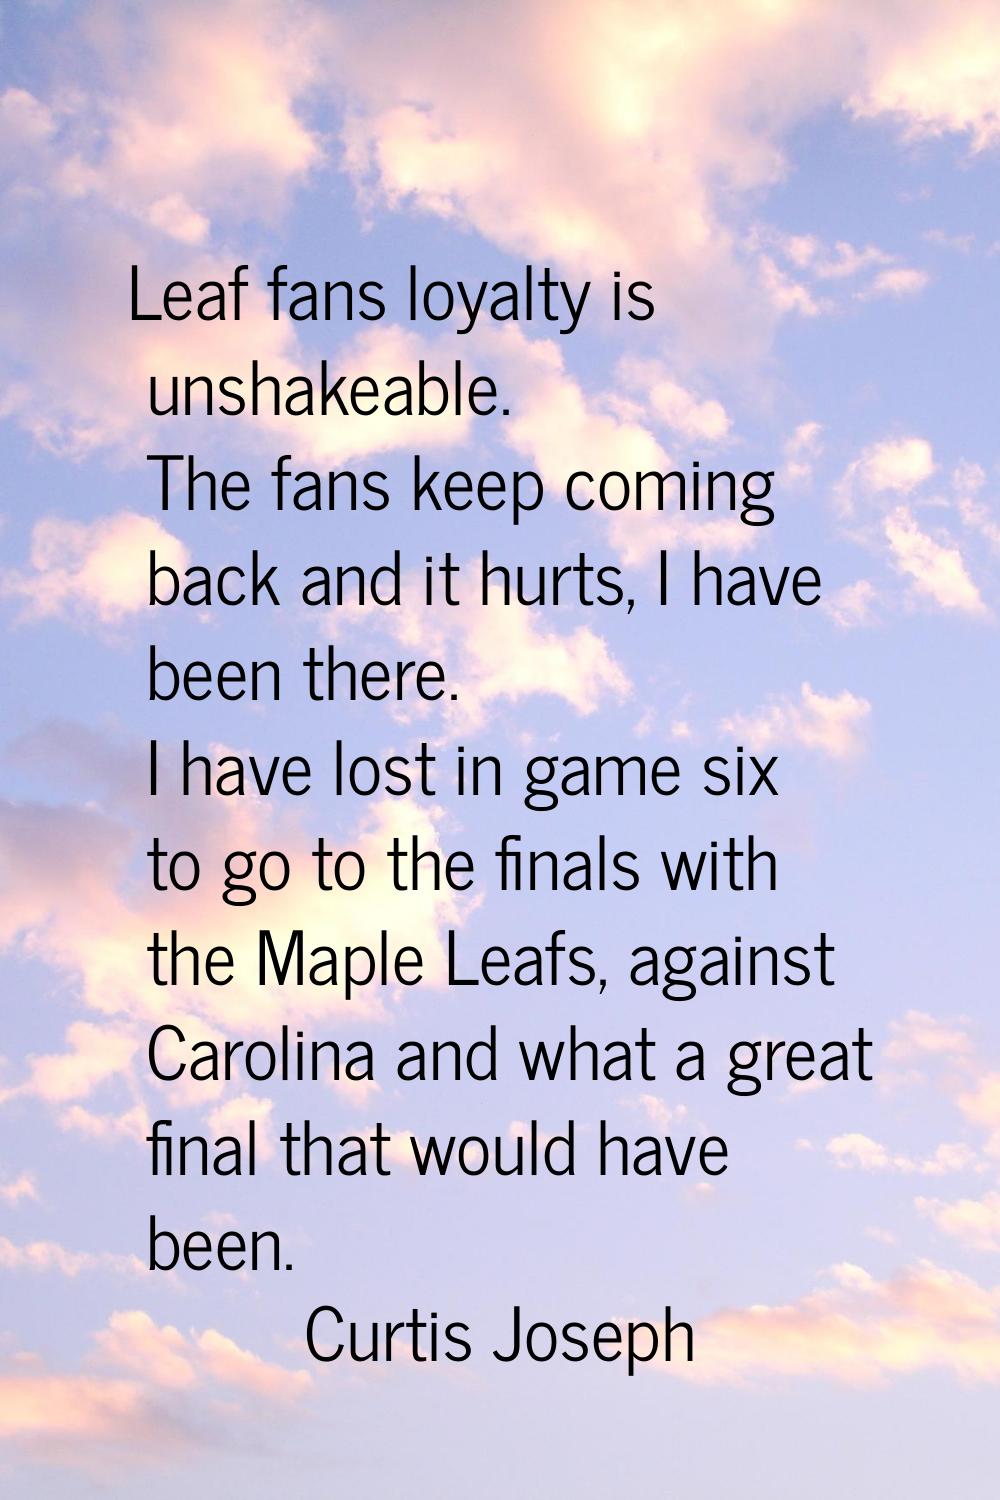 Leaf fans loyalty is unshakeable. The fans keep coming back and it hurts, I have been there. I have